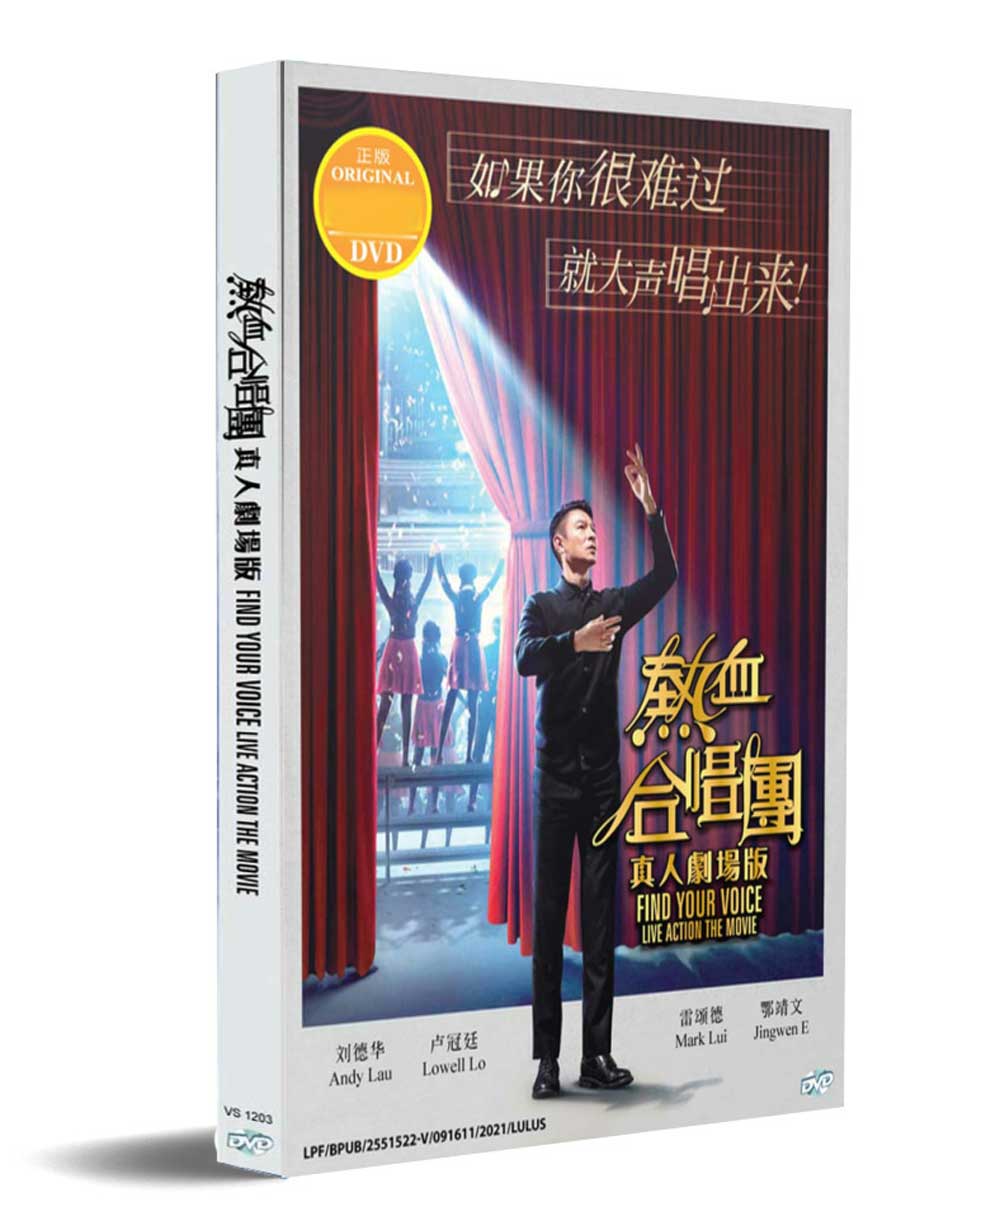 Find Your Voice (DVD) (2020) Hong Kong Movie